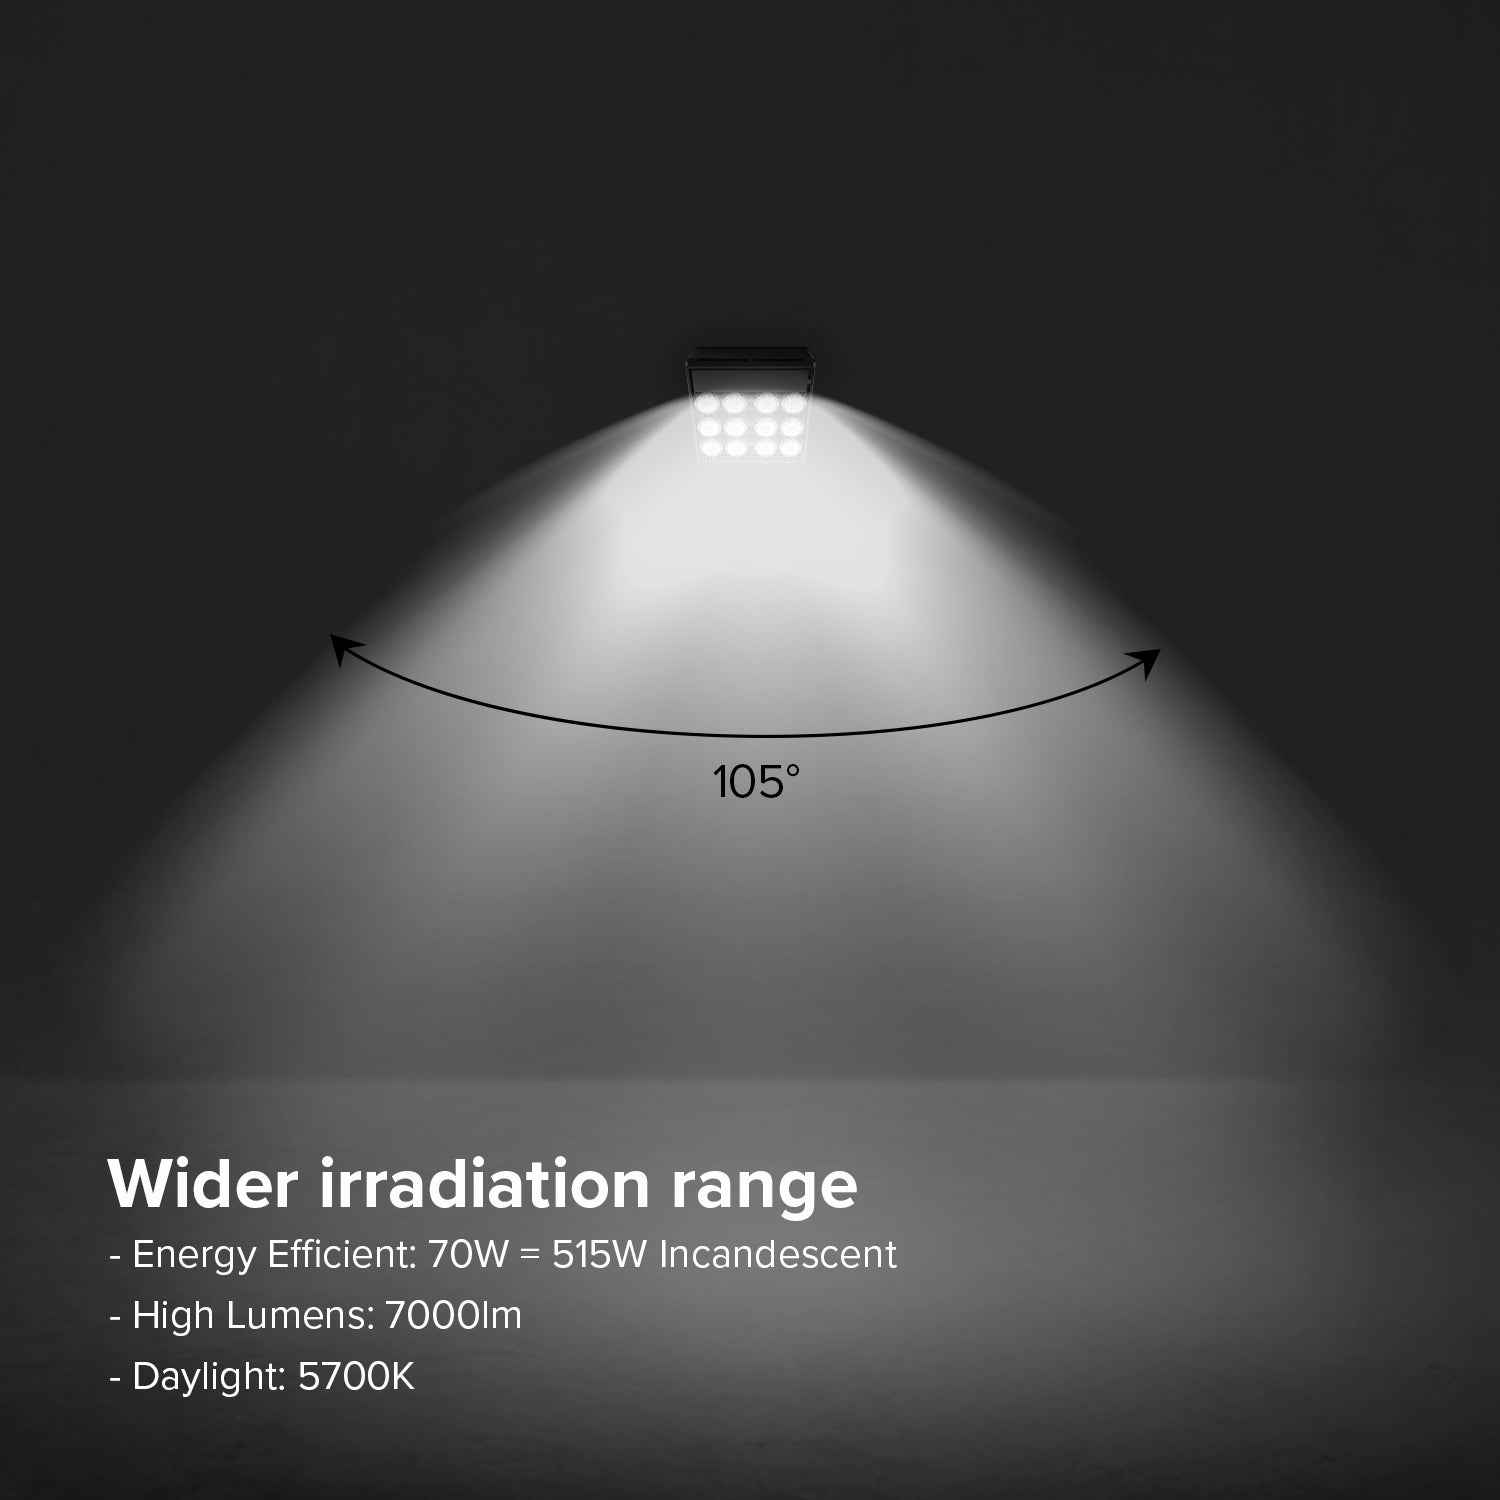 70W LED Wall Pack Light (Dusk to Dawn) (US ONLY) has wider irradiation range.